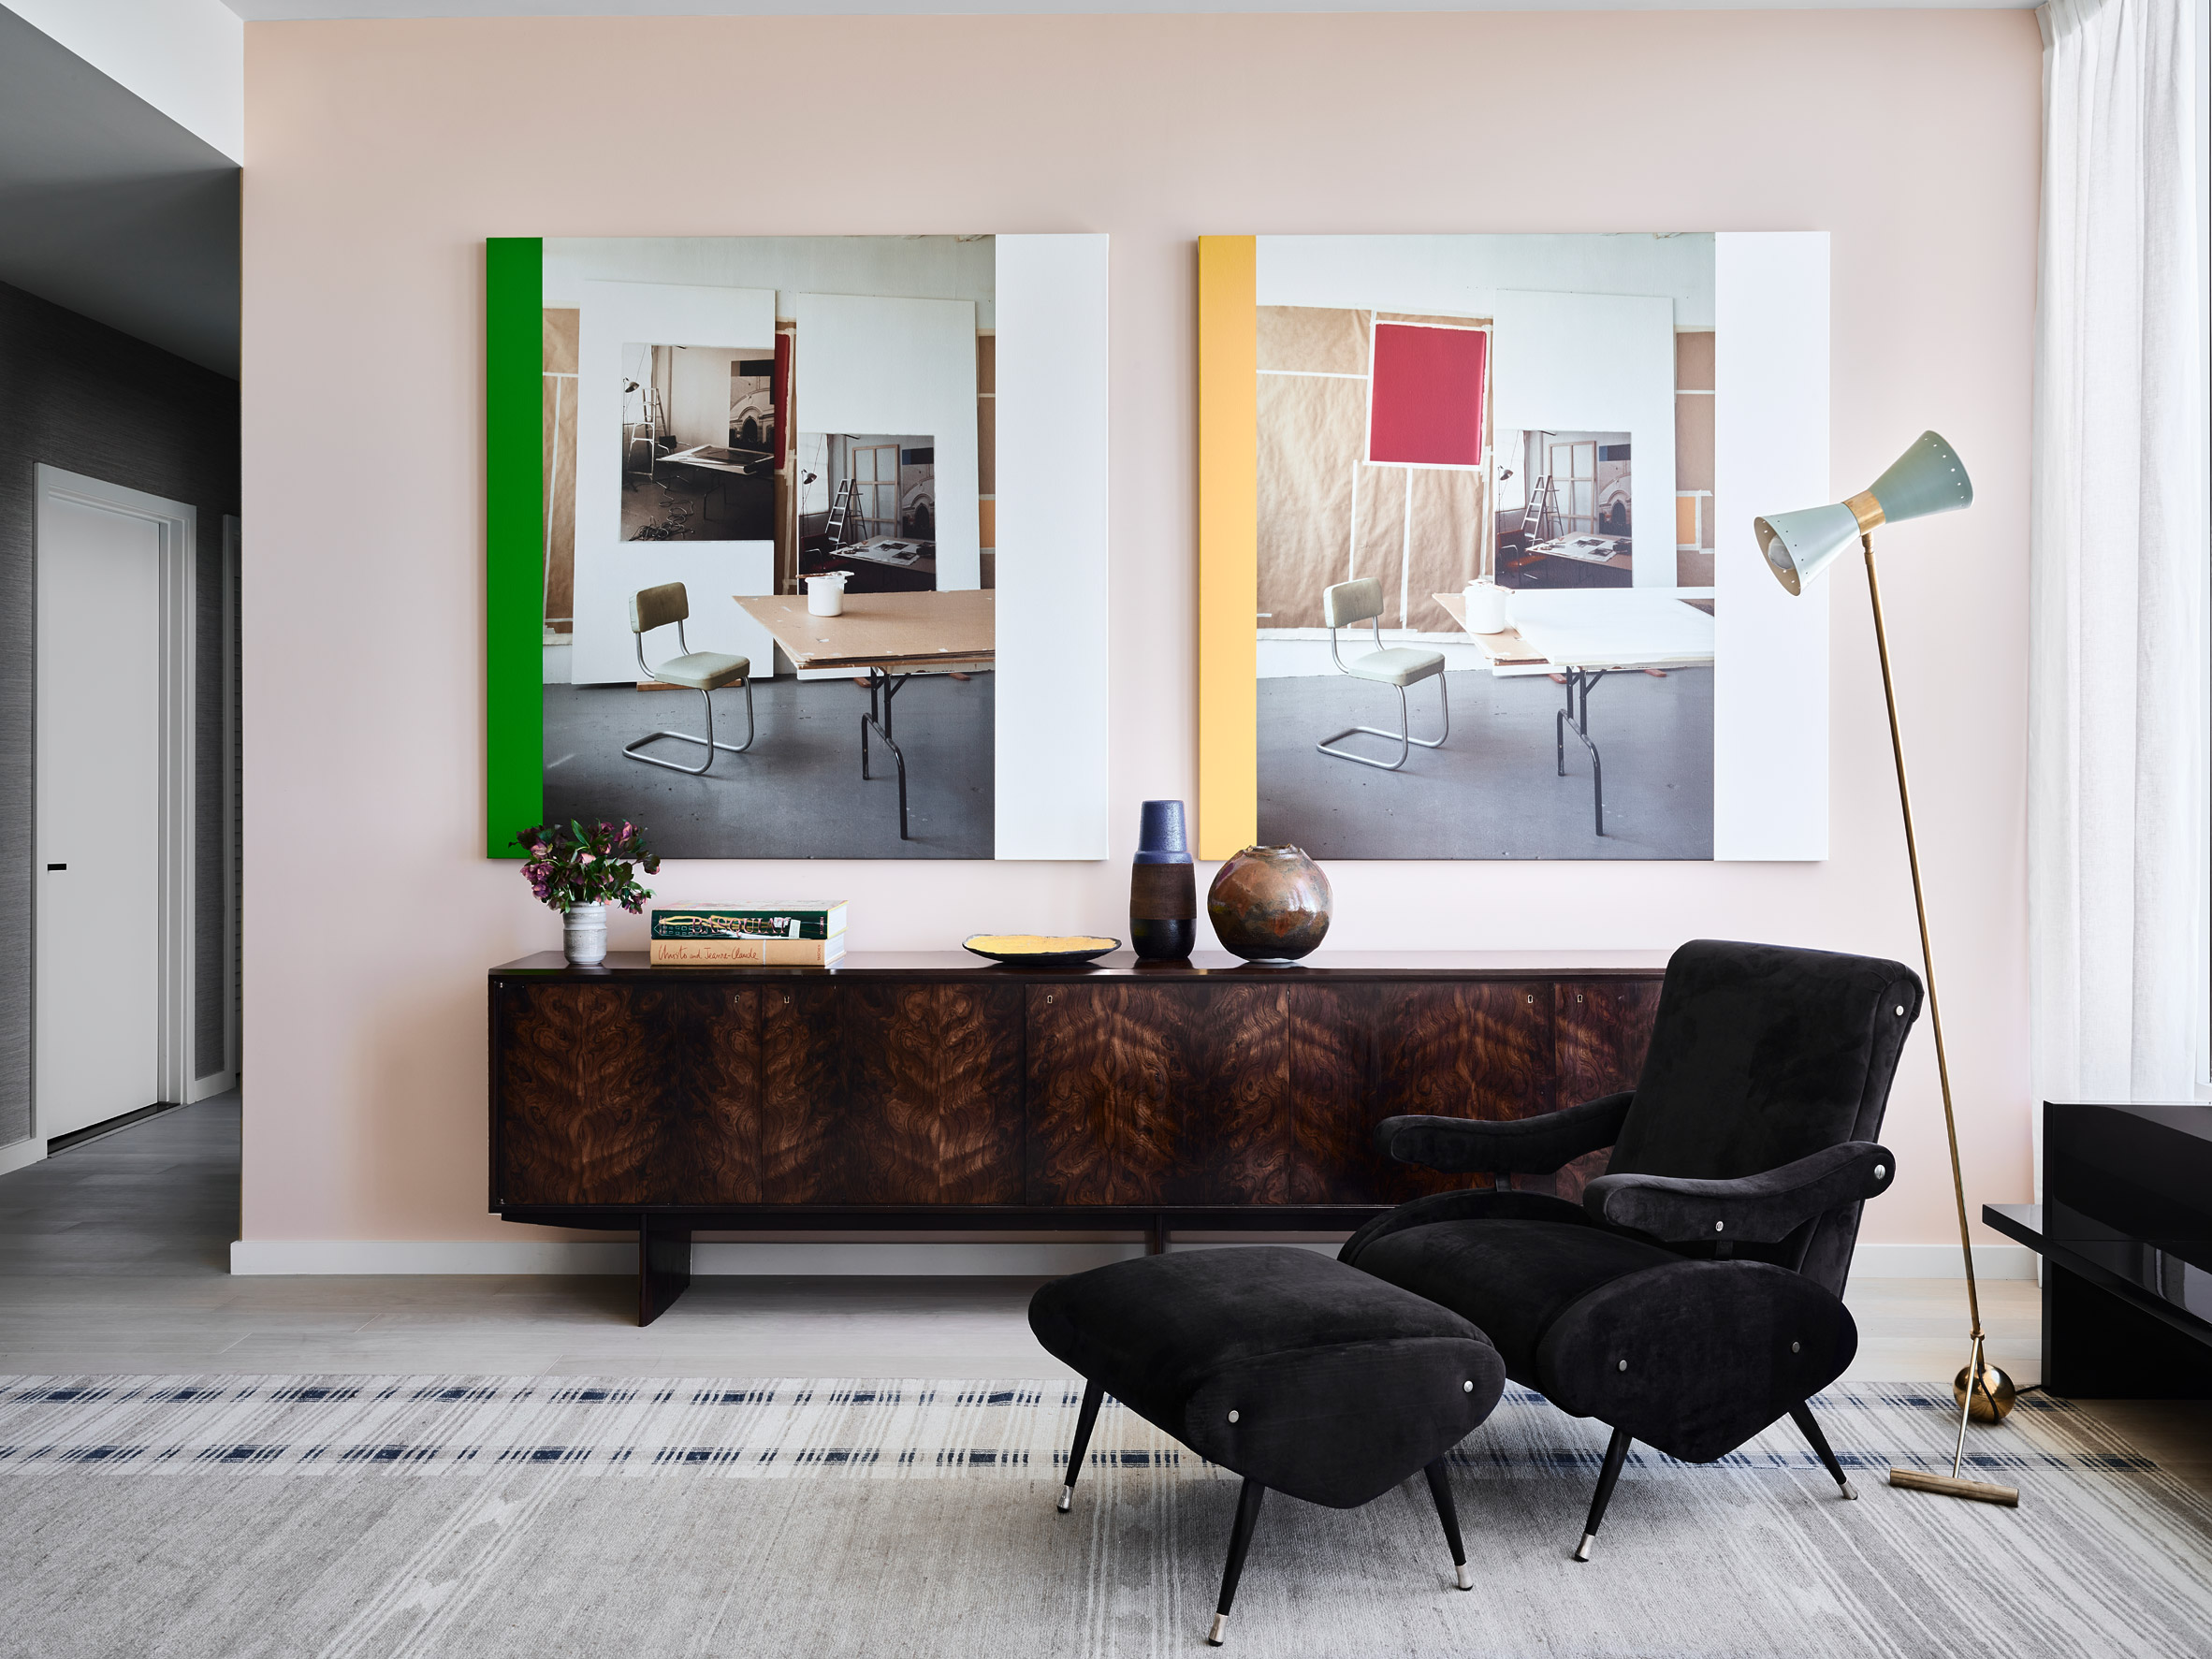 Living room of San Francisco penthouse exhibition by Gabriel & Guillaume